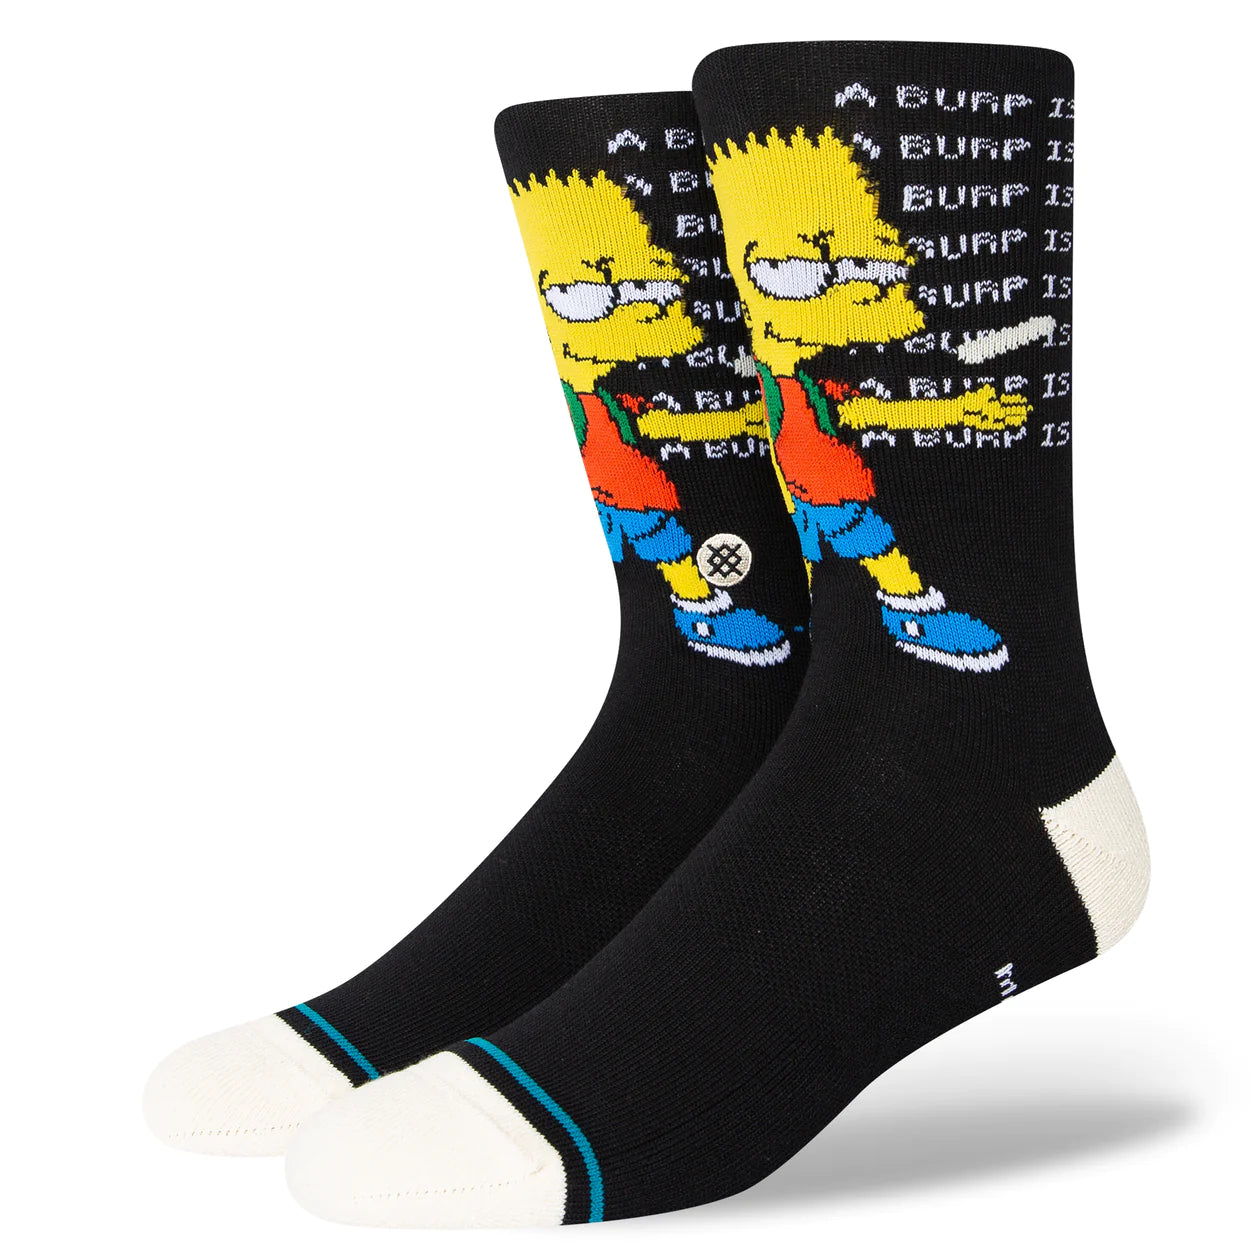 Stance "The Simpsons Troubled" (Black)